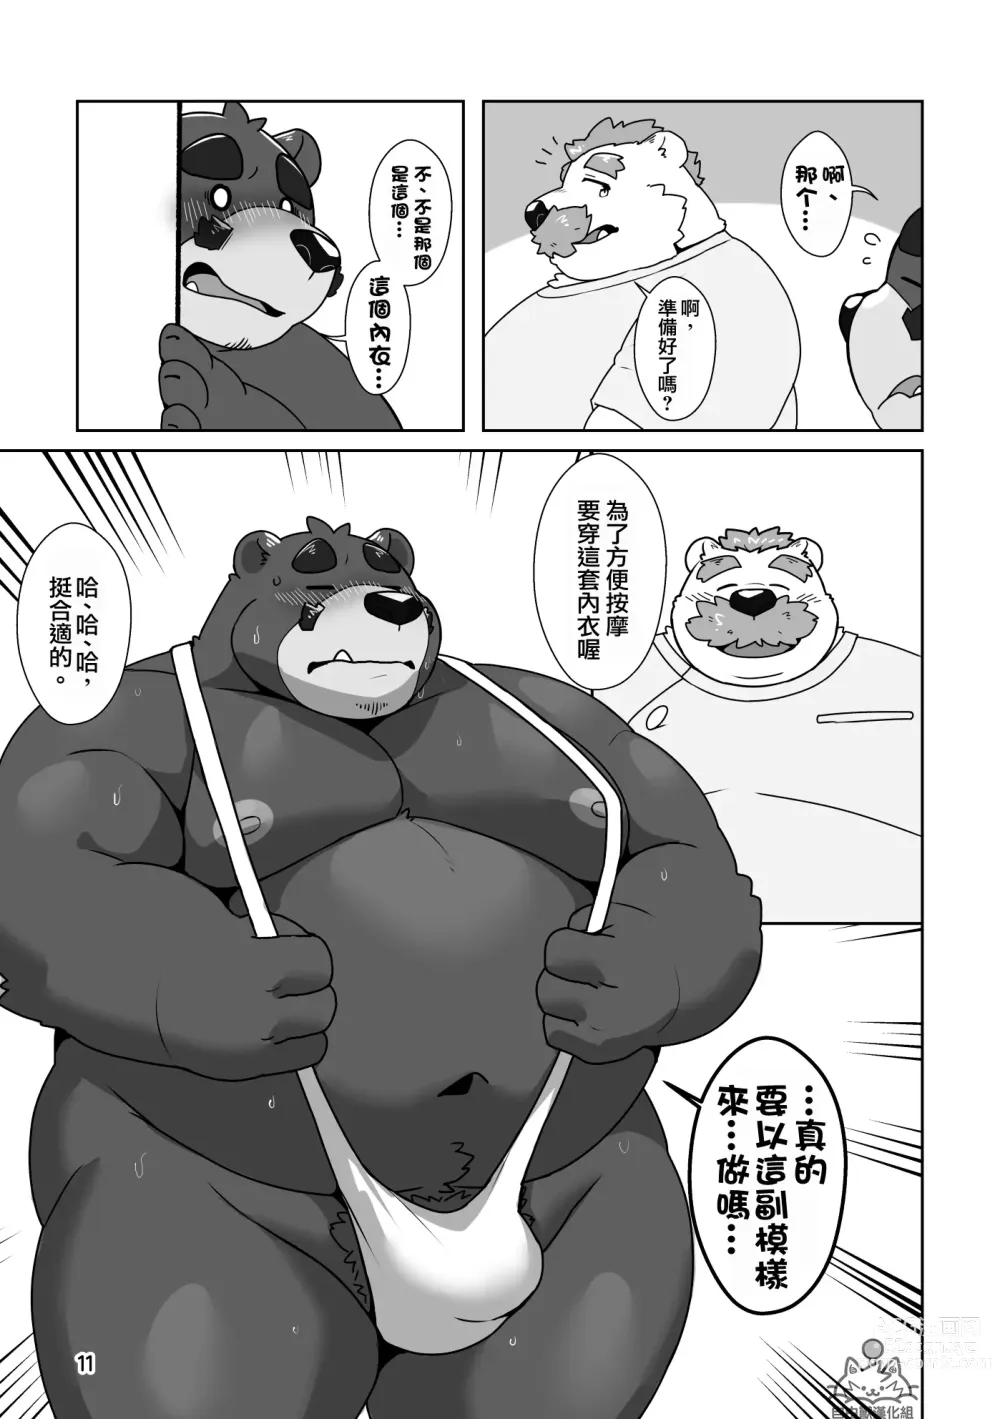 Page 10 of doujinshi 直男熊爸爸的心砰砰跳塗油按摩